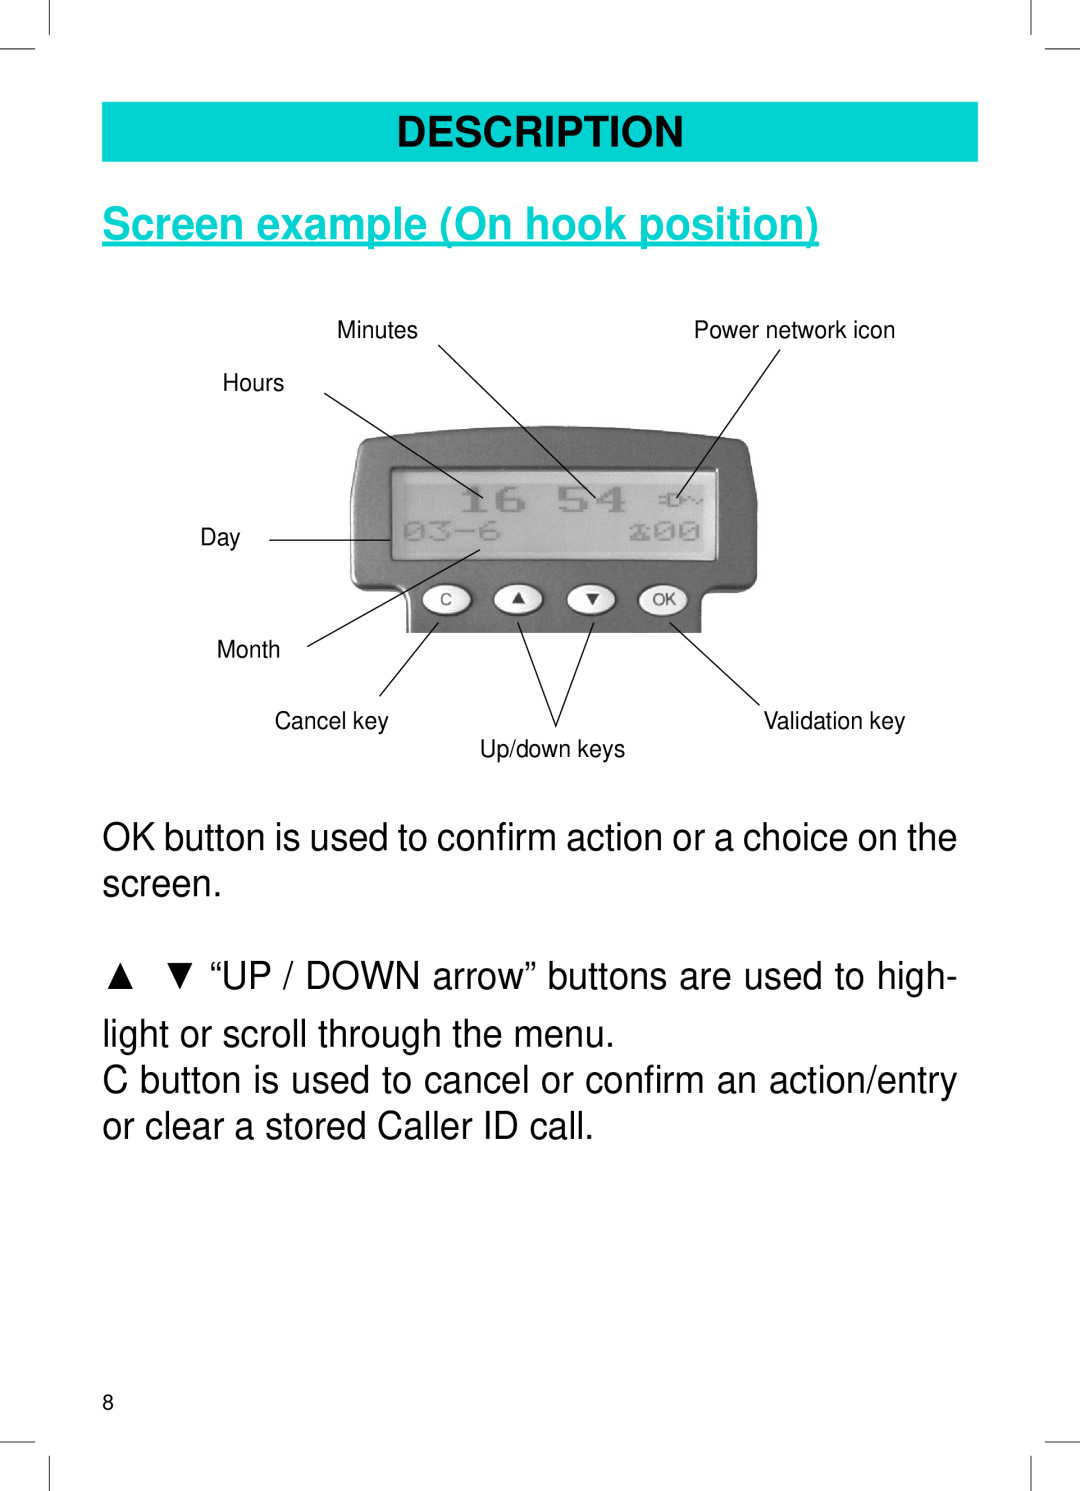 Geemarc AMPLI600 Screen example On hook position, OK button is used to conﬁrm action or a choice on the screen, Minutes 